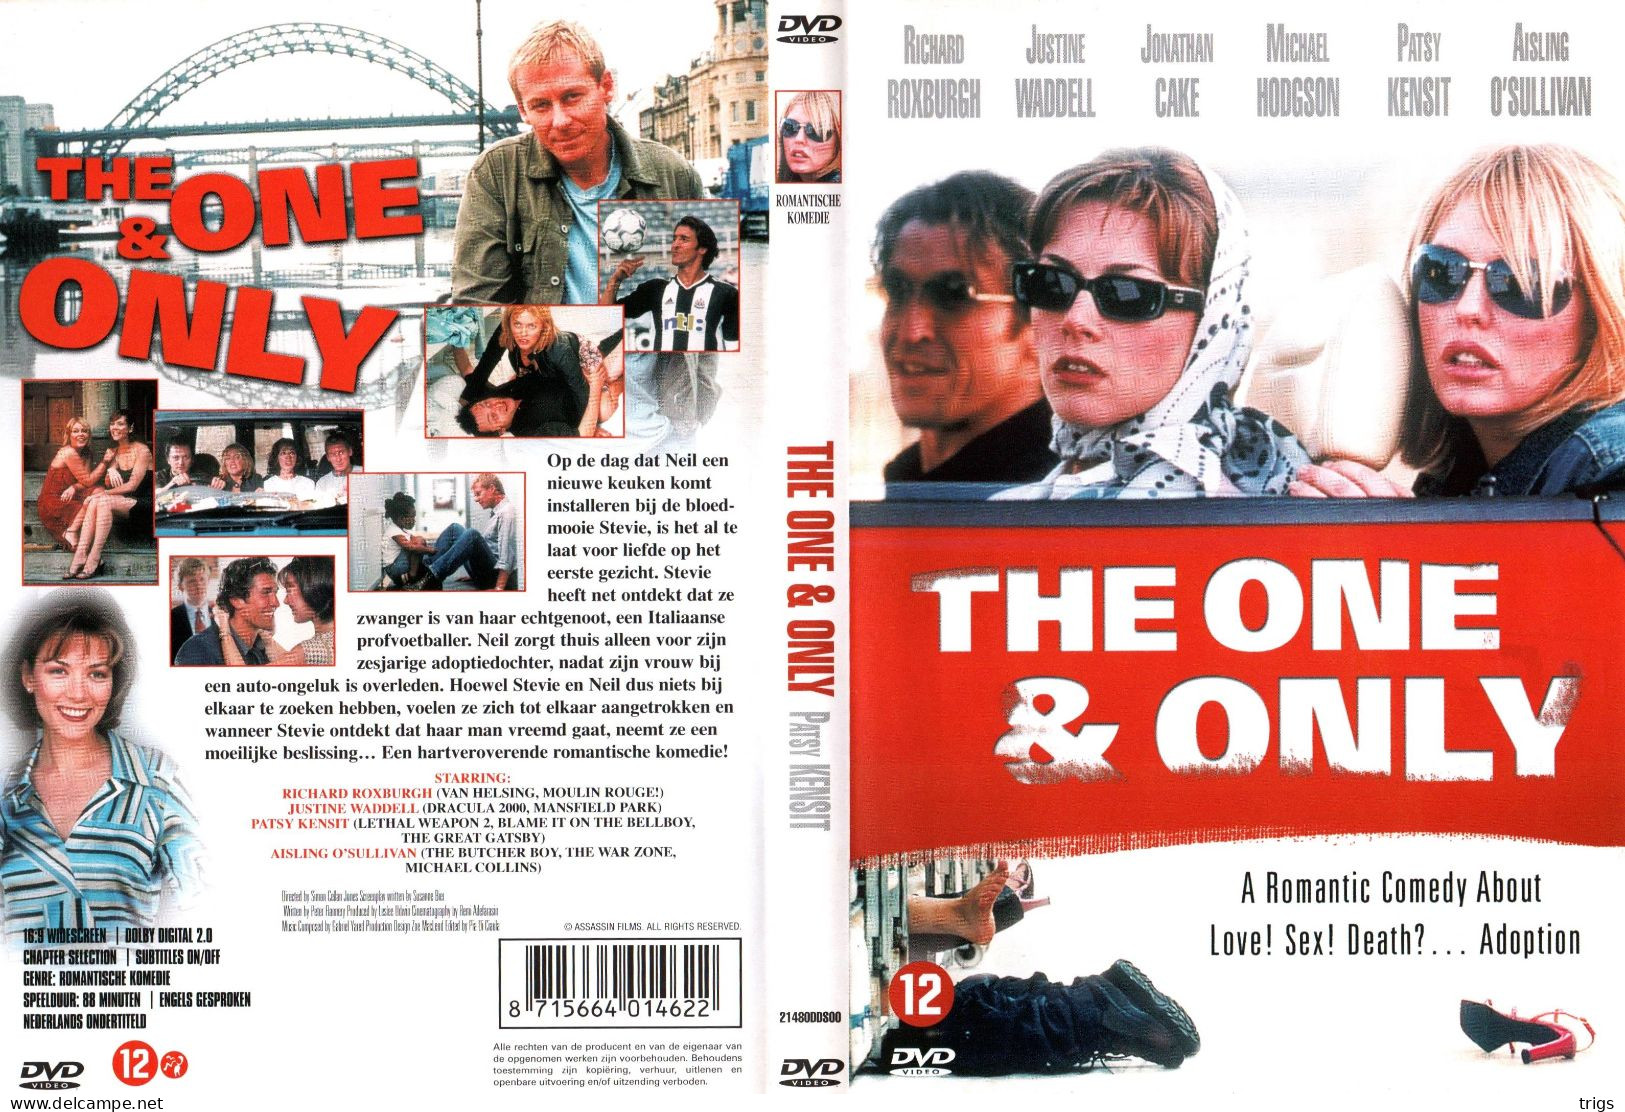 DVD - The One & Only - Comédie